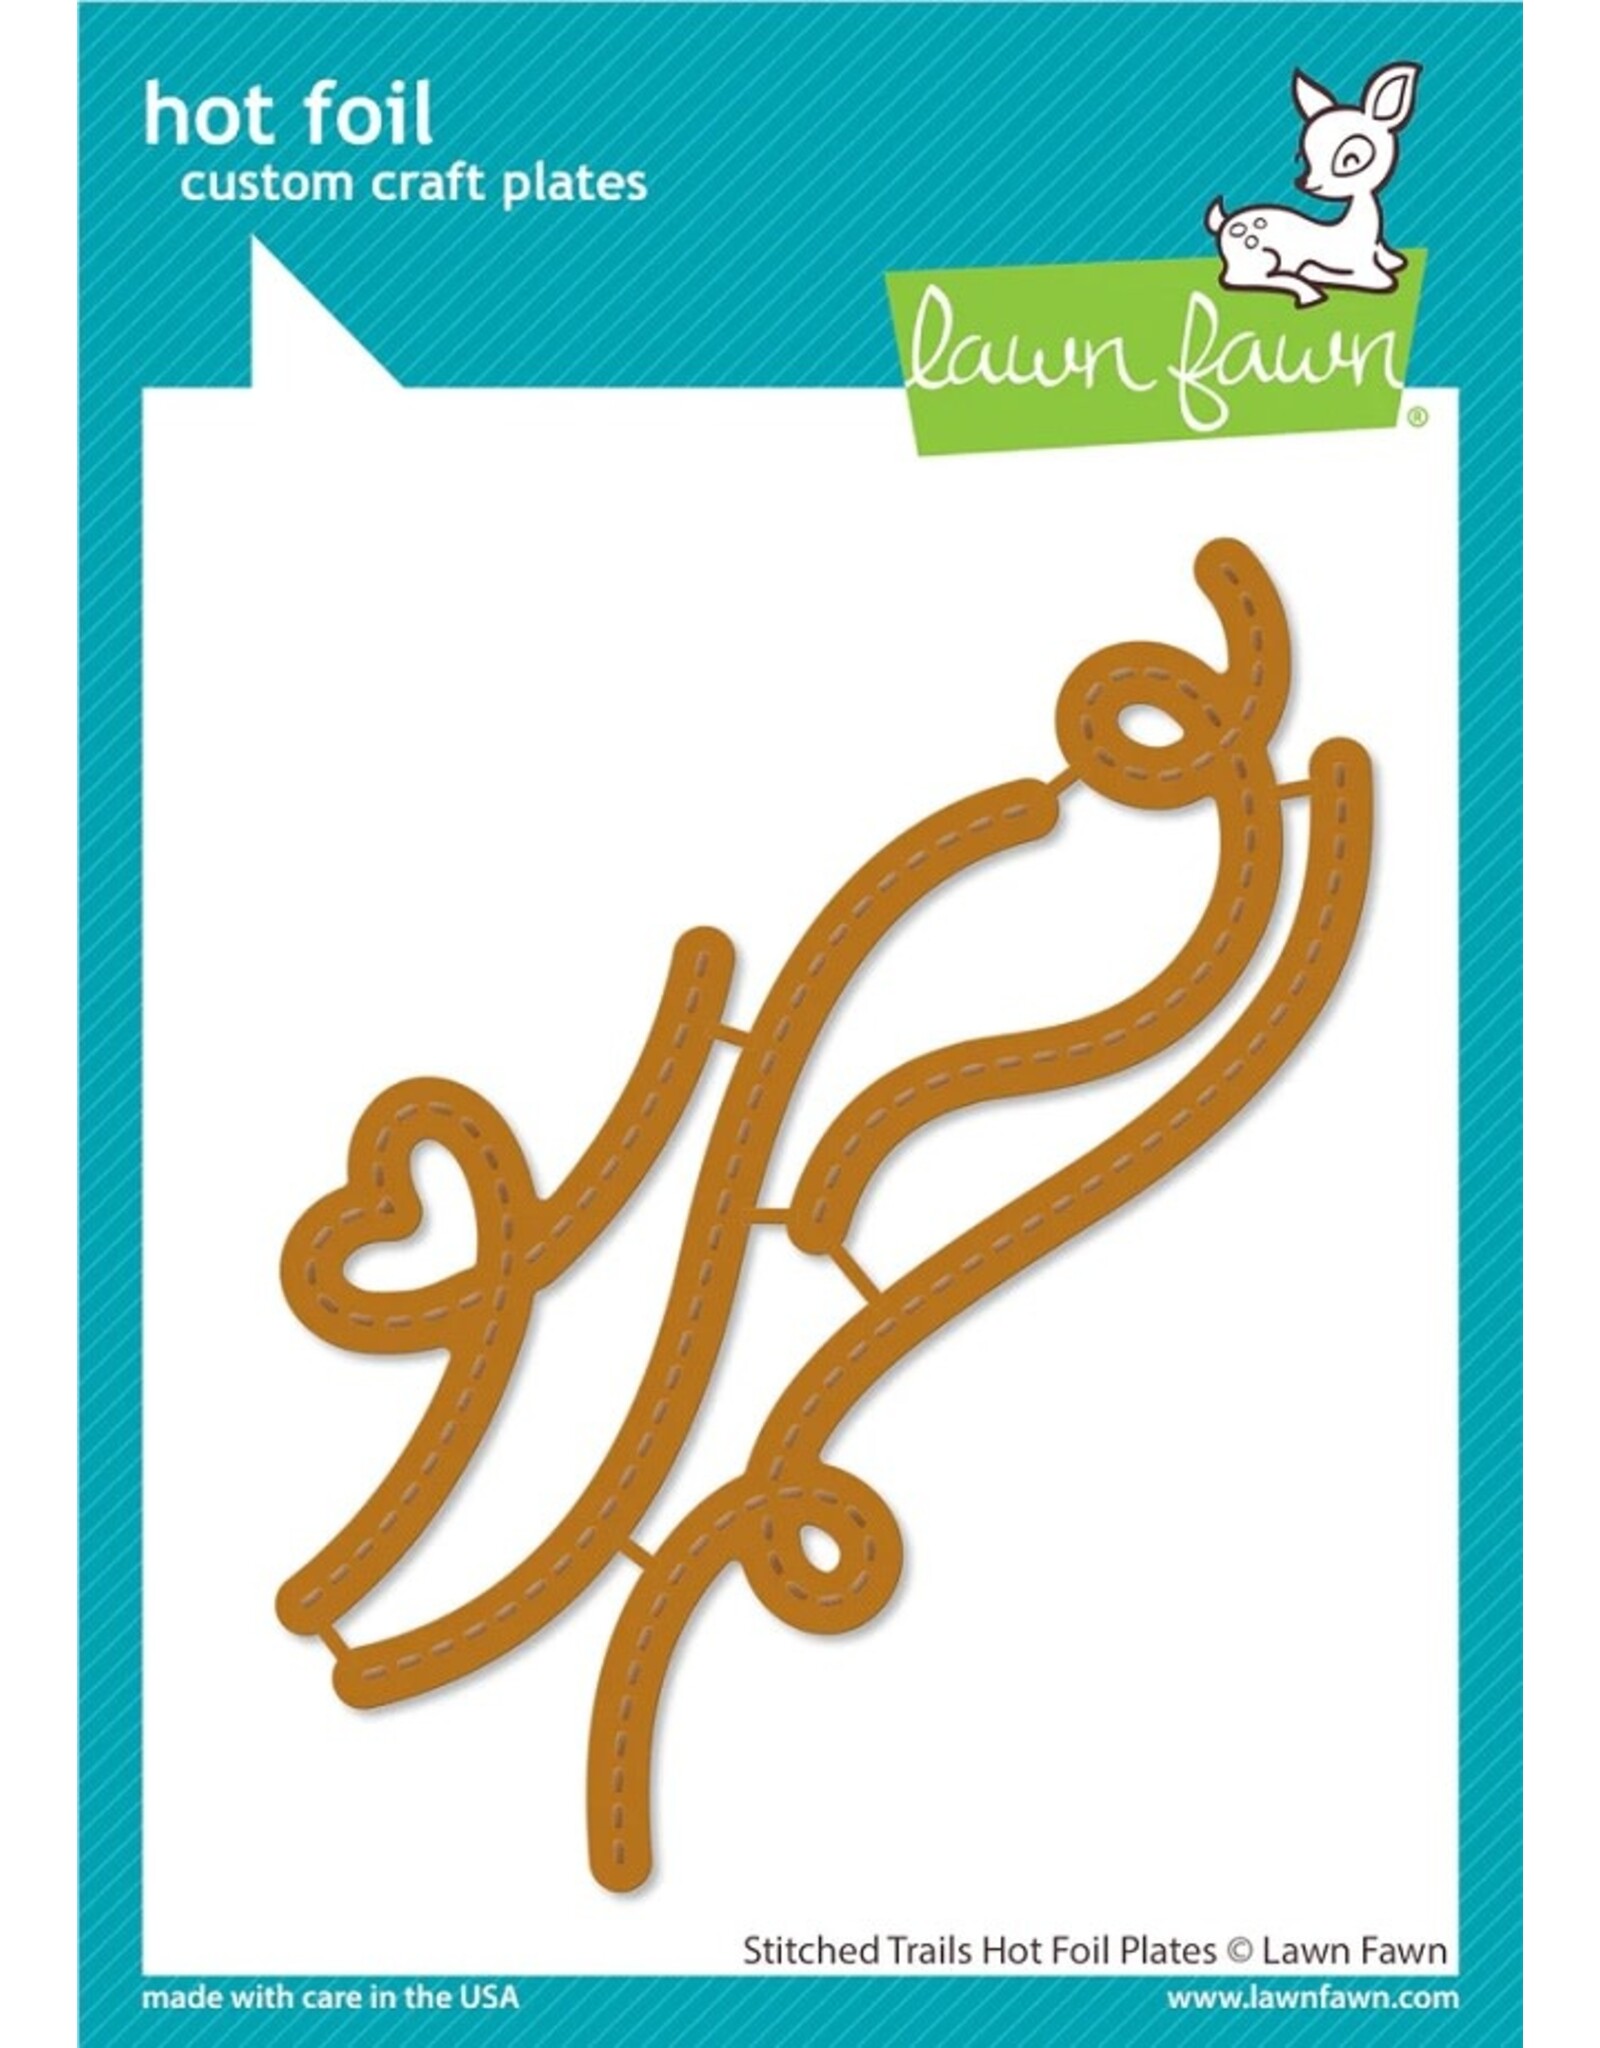 Lawn Fawn Stitched Trails - Hot Foil Plates